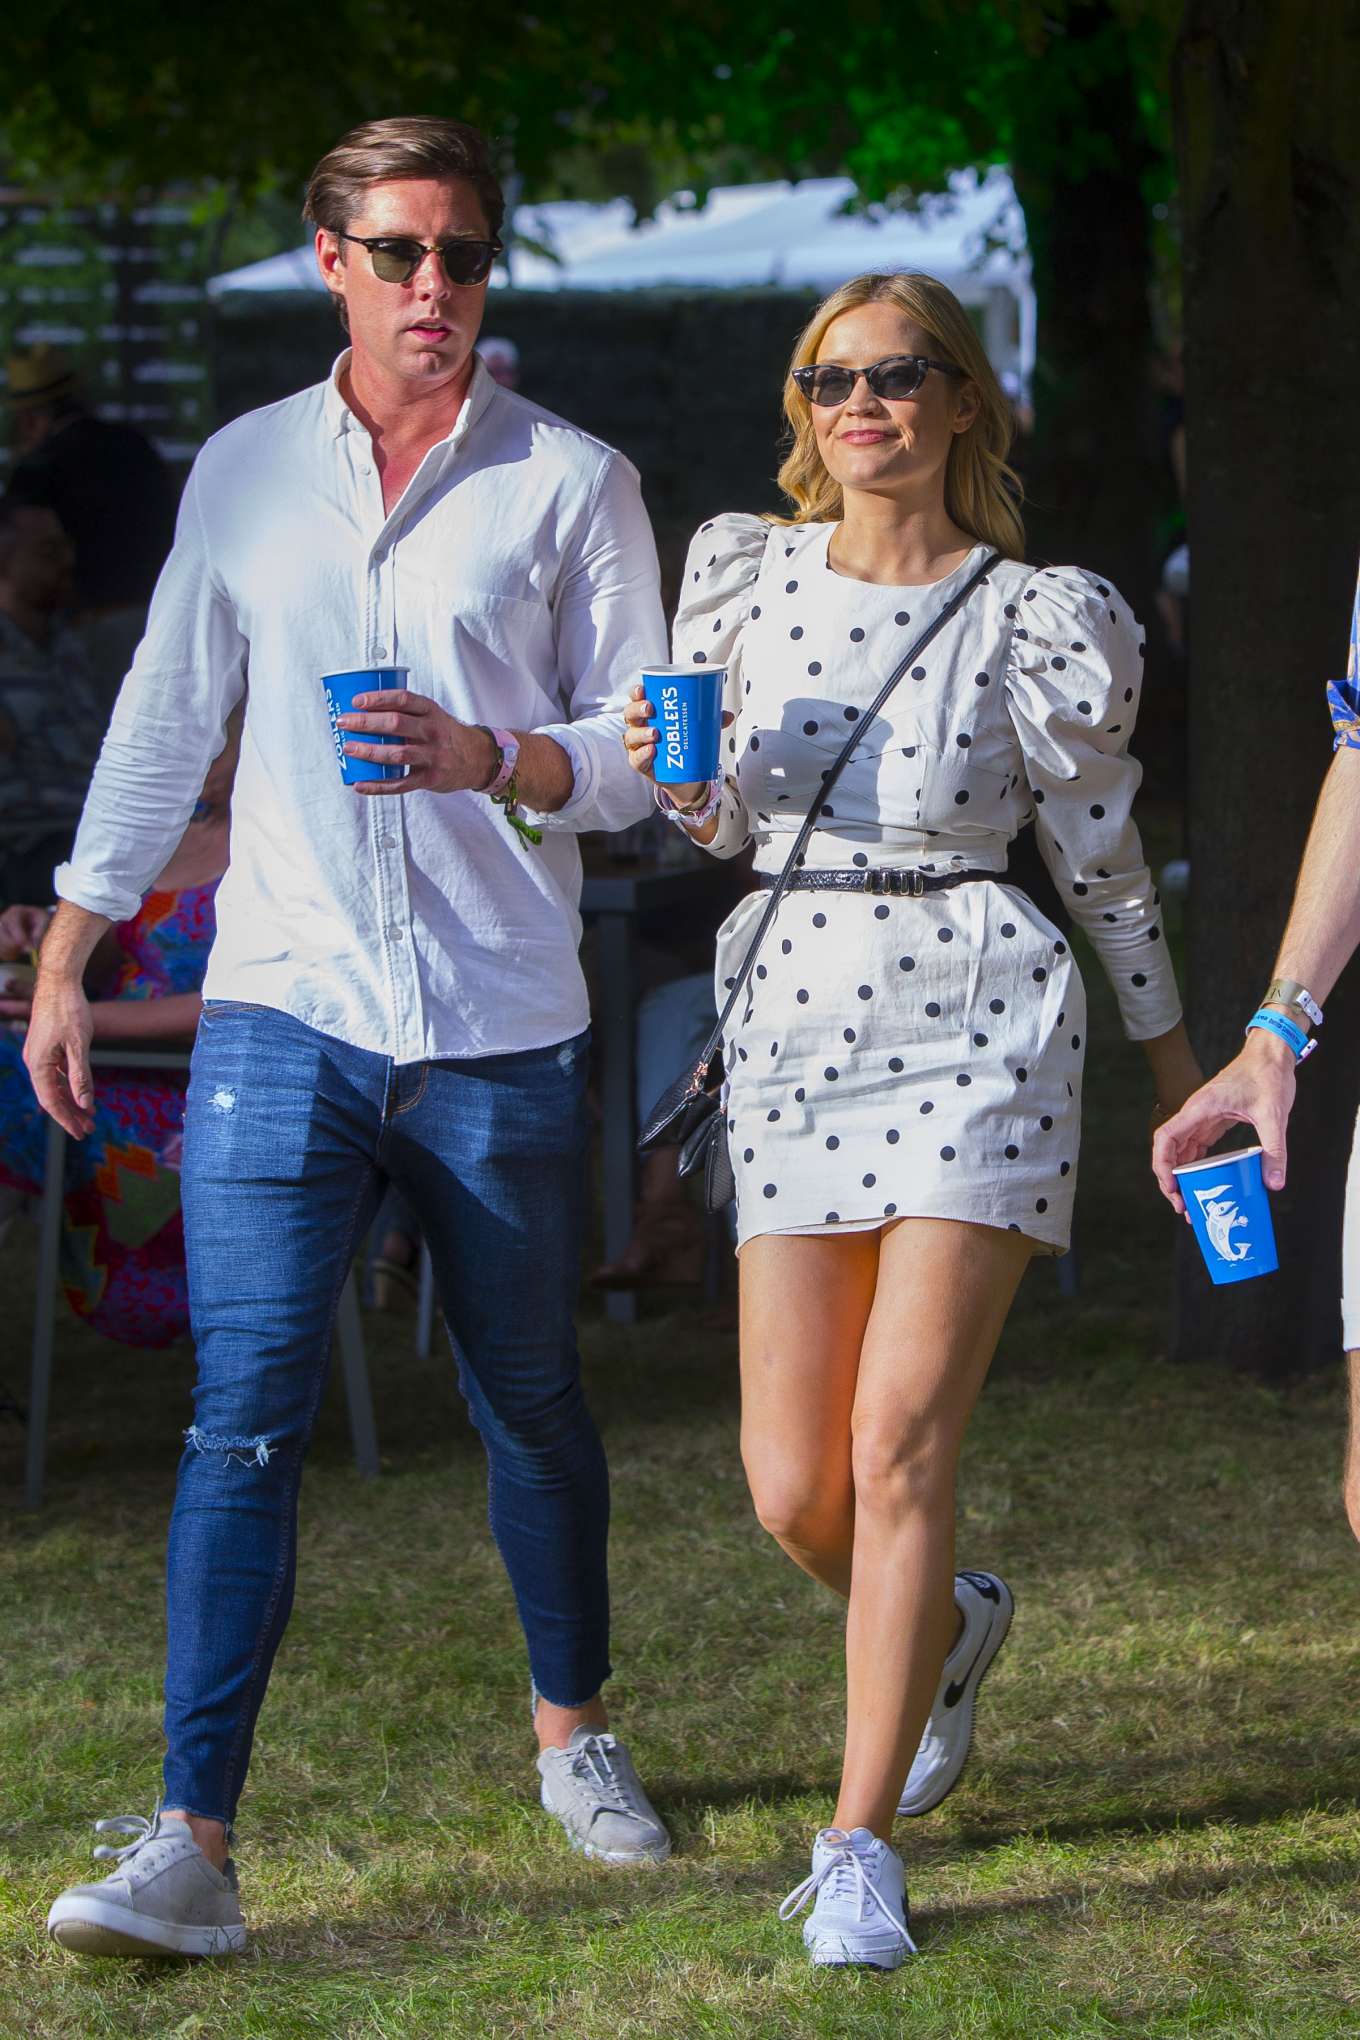 Laura Whitmore in White Polkadot Mini Dress at British Summer Time in Hyde Park